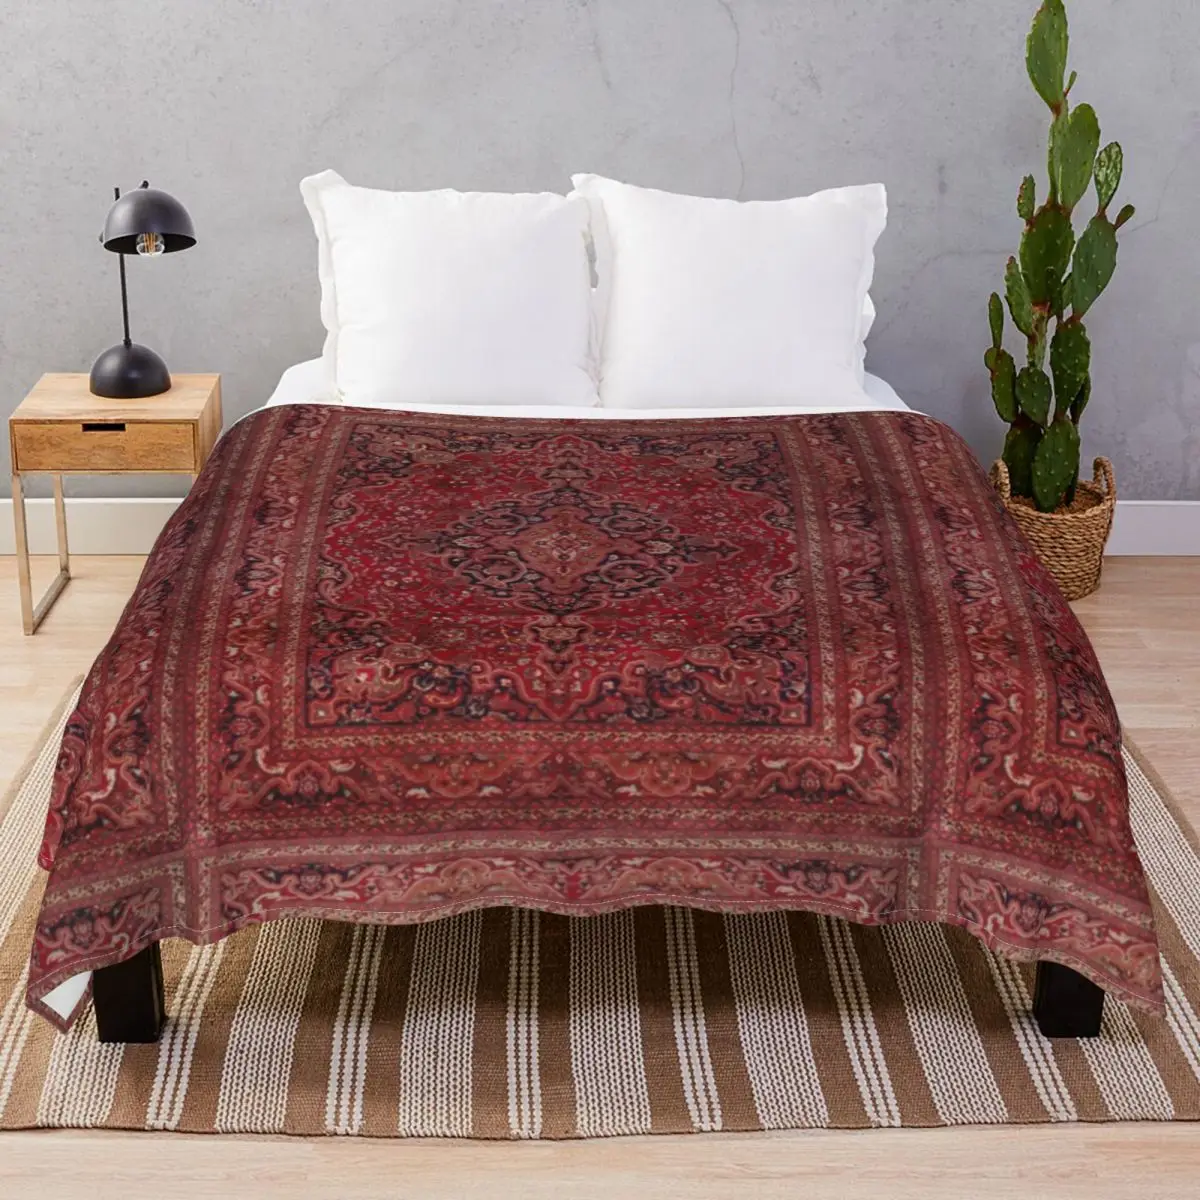 Antique Persian Rug Blanket Flannel Decoration Comfortable Throw Blankets for Bed Sofa Camp Cinema